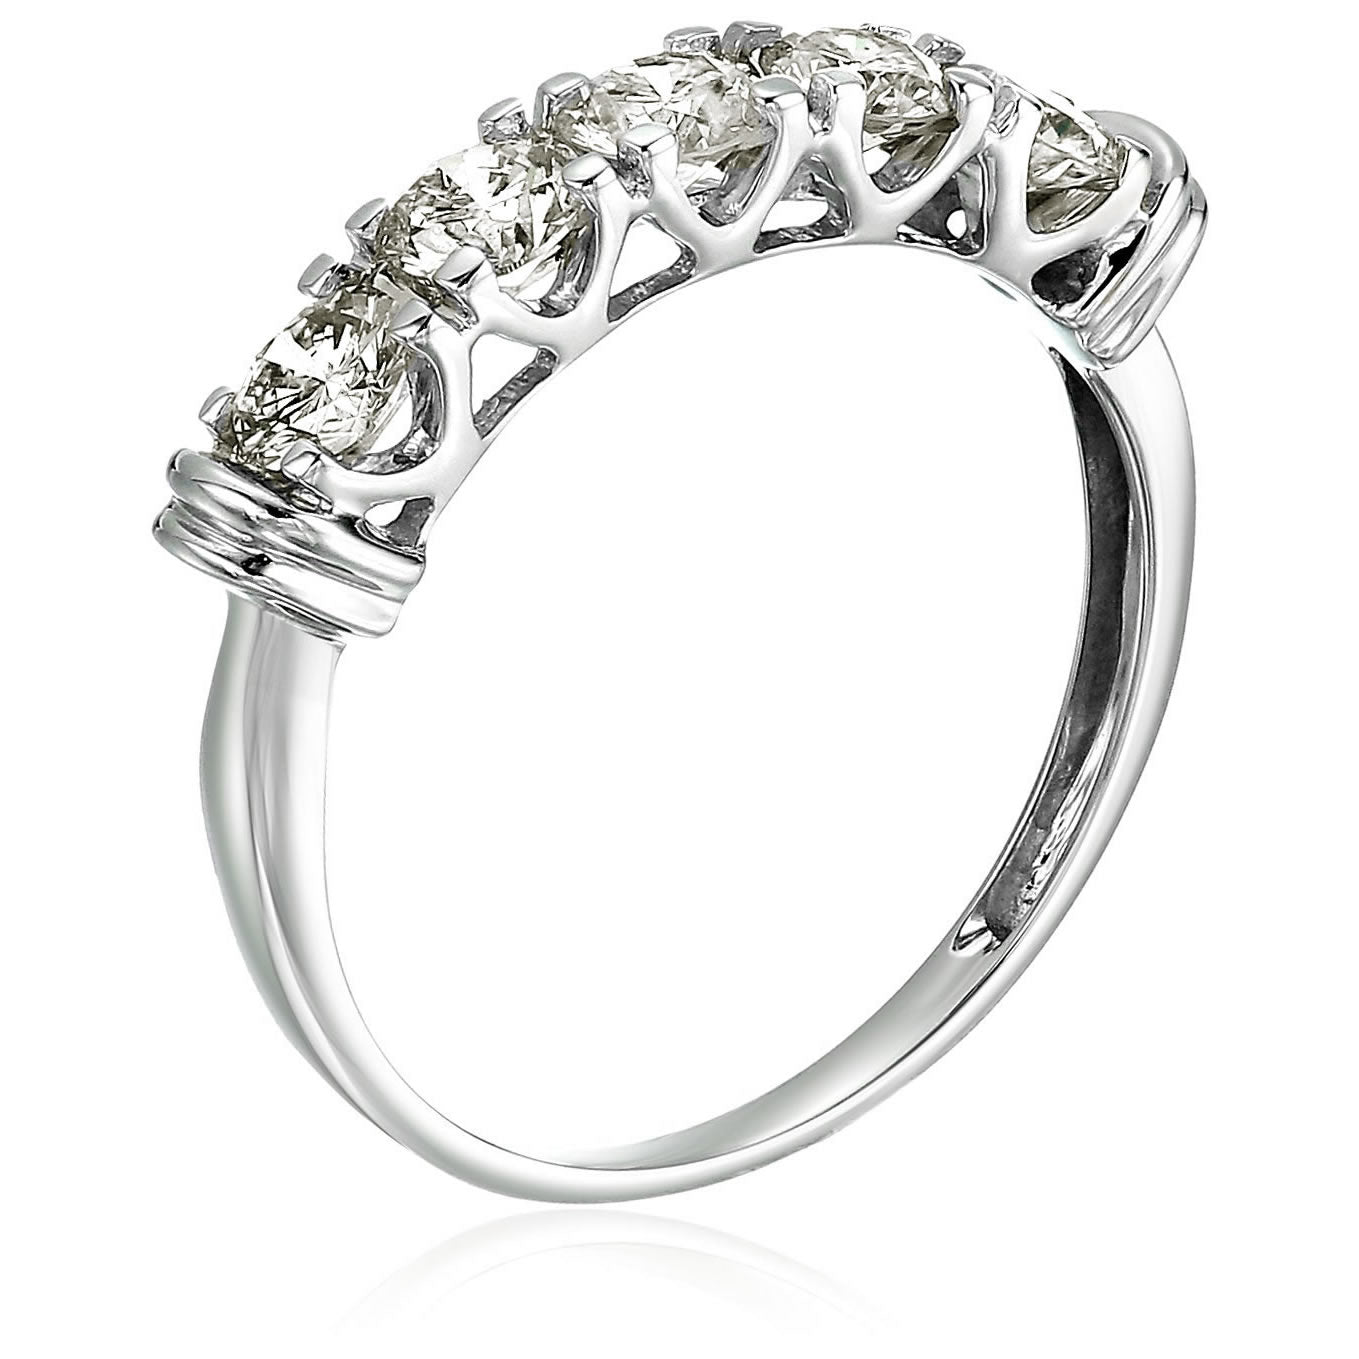 1 cttw Certified SI2-I1 5 Stone Diamond Engagement Ring 14K White Gold